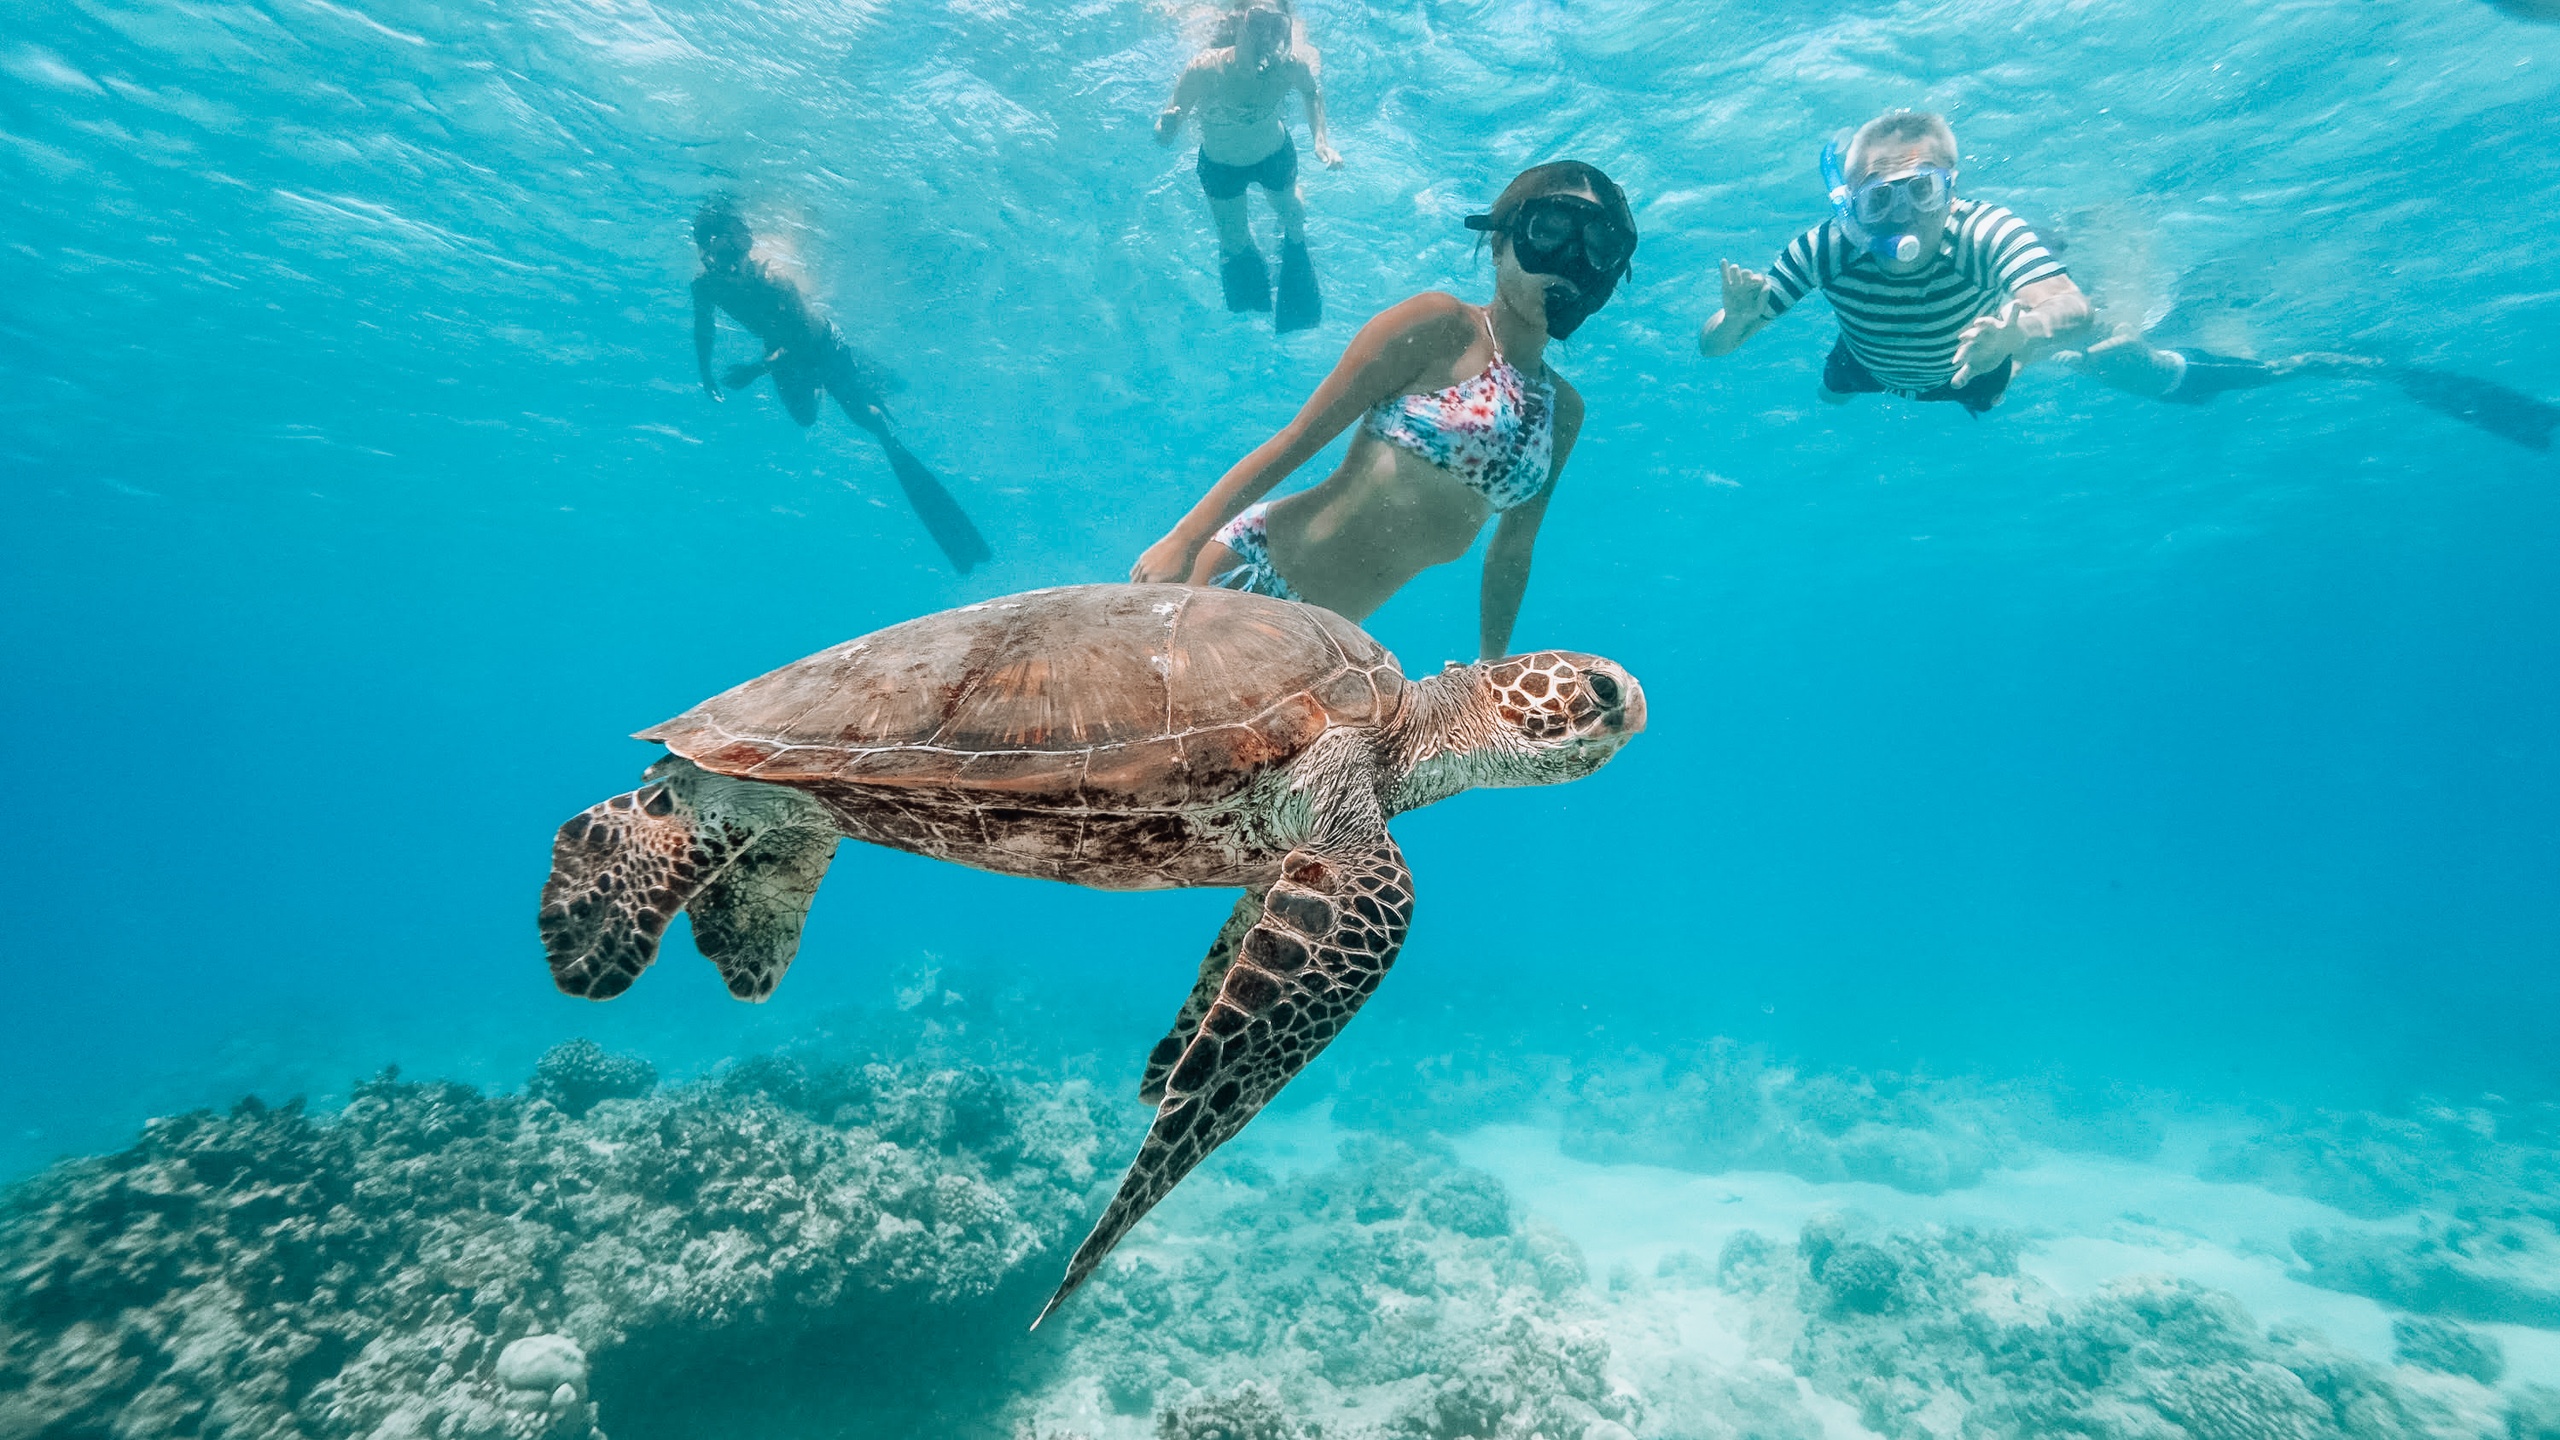 Snorkel with turtles from Kewalo 